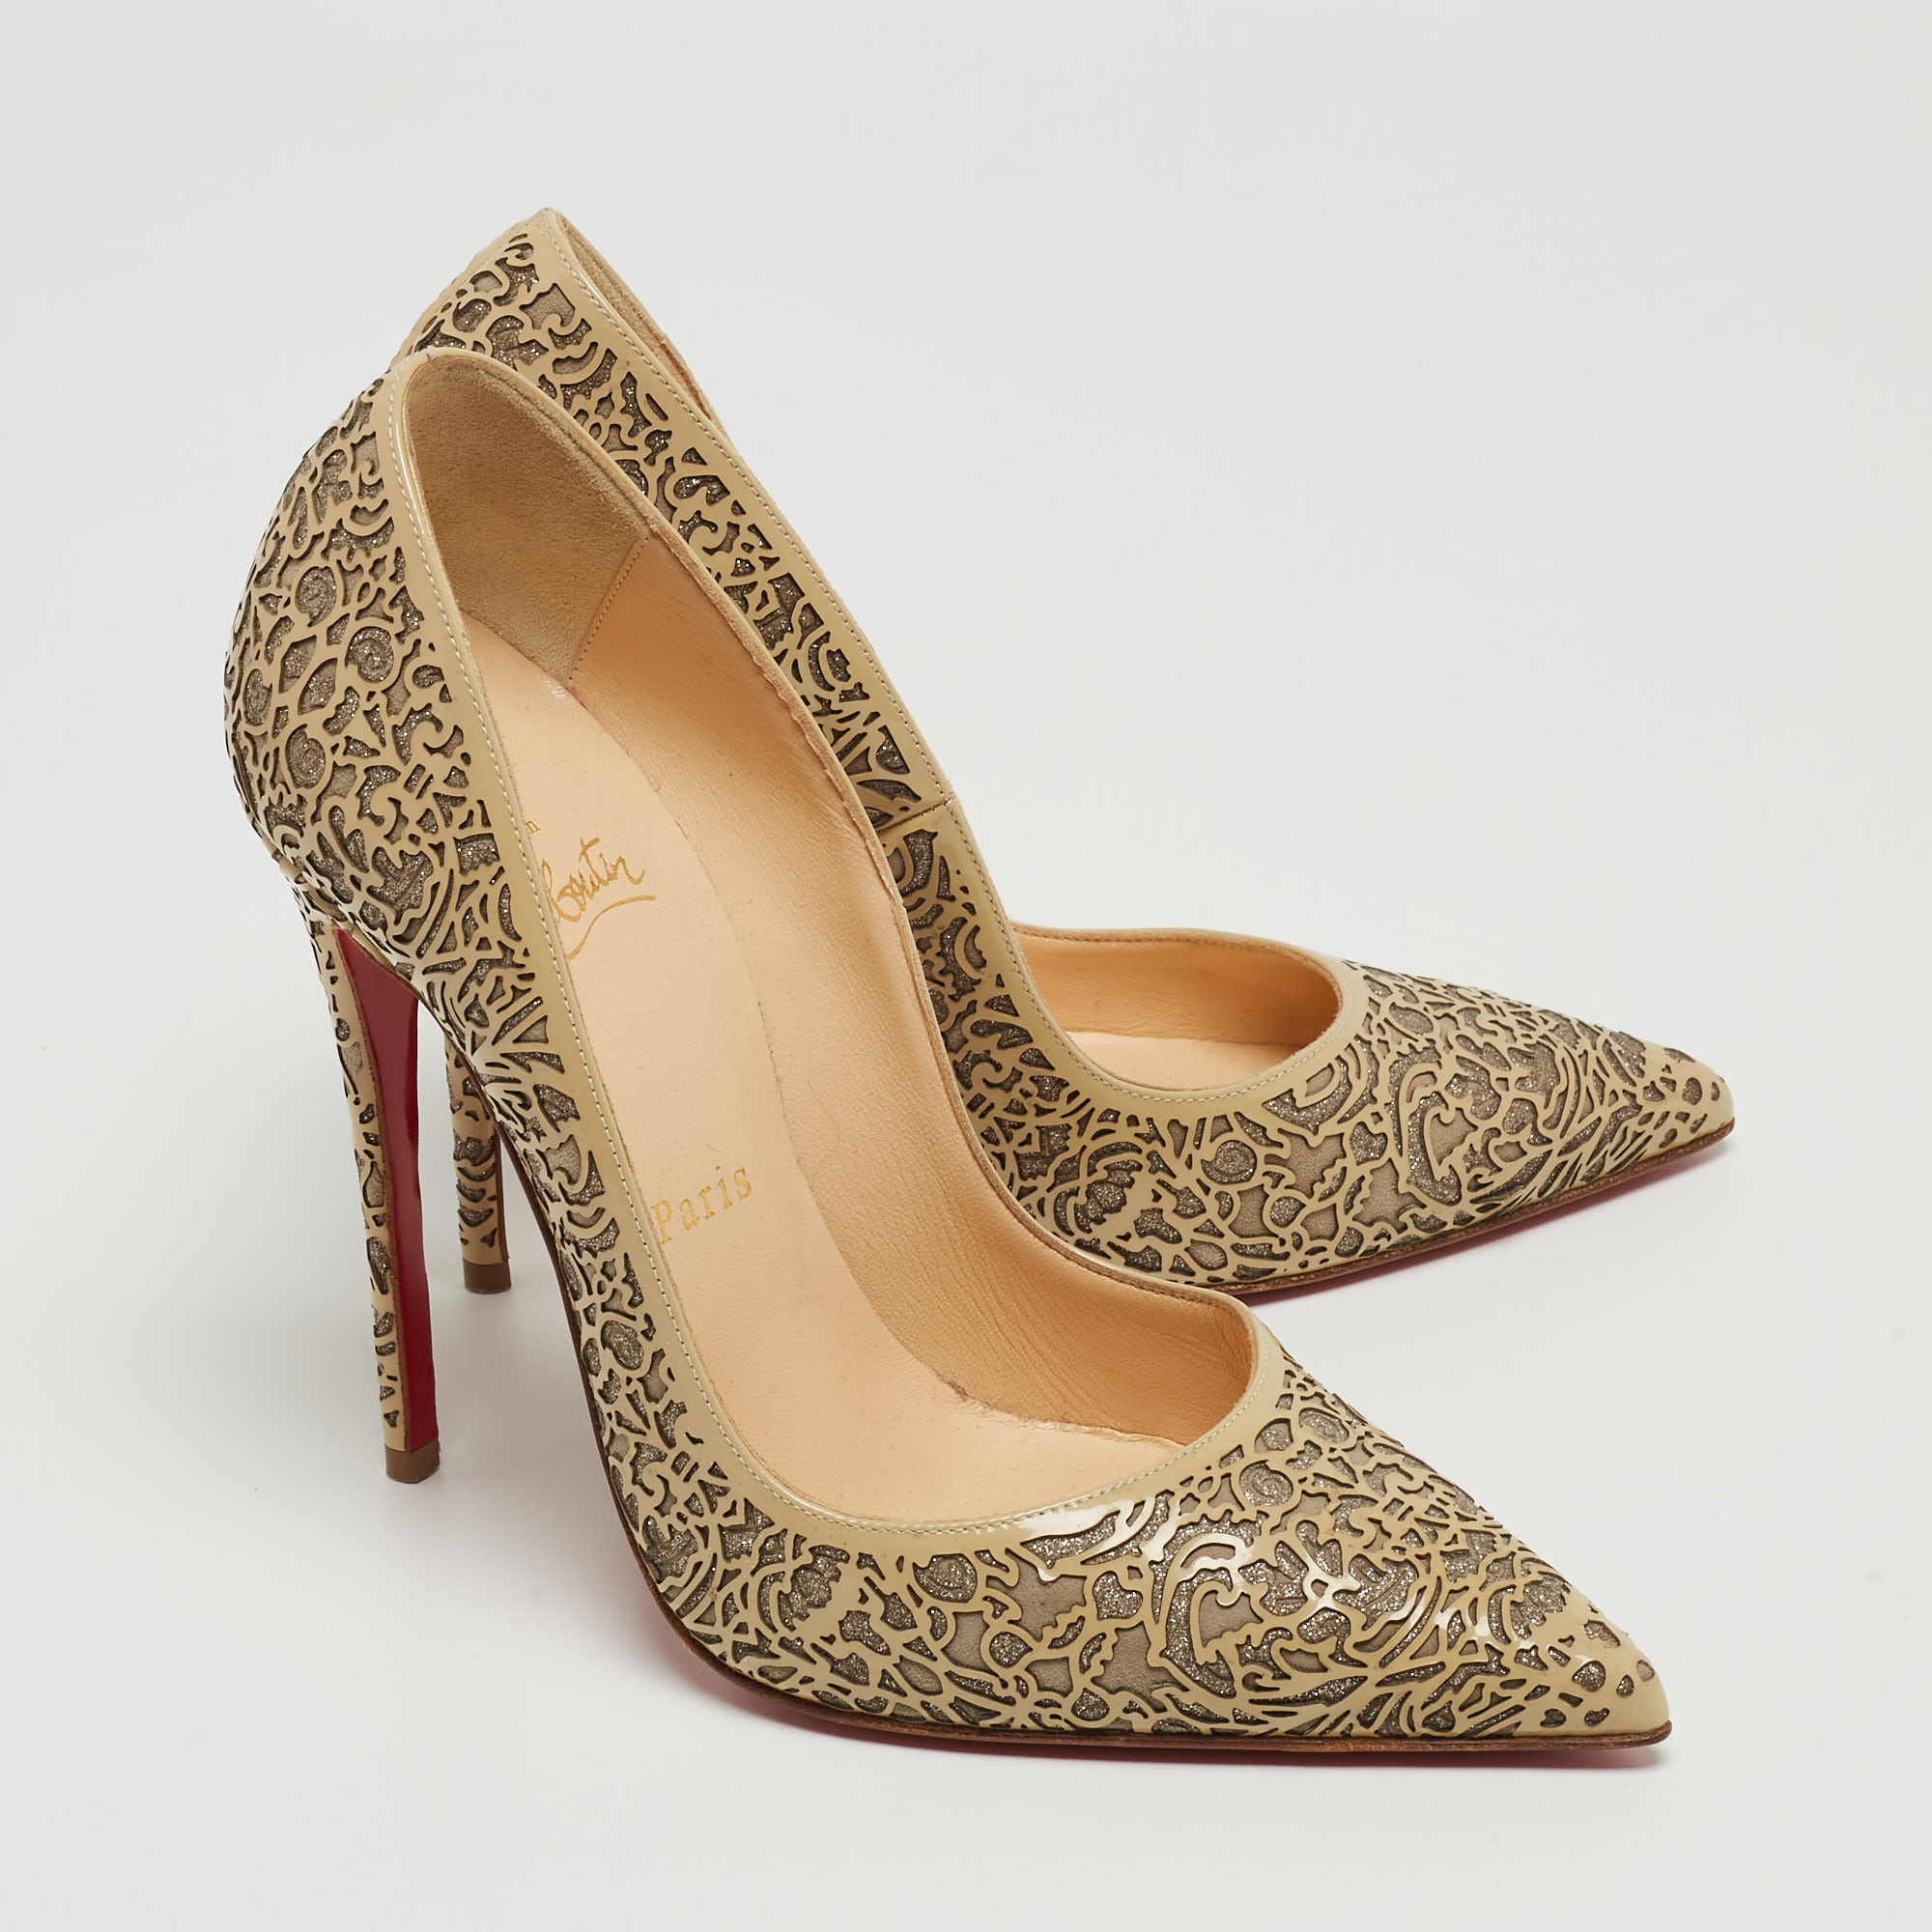 Christian Louboutin Two Tone Laser Cut Patent Leather And Glitter So Kate Pumps Size 37